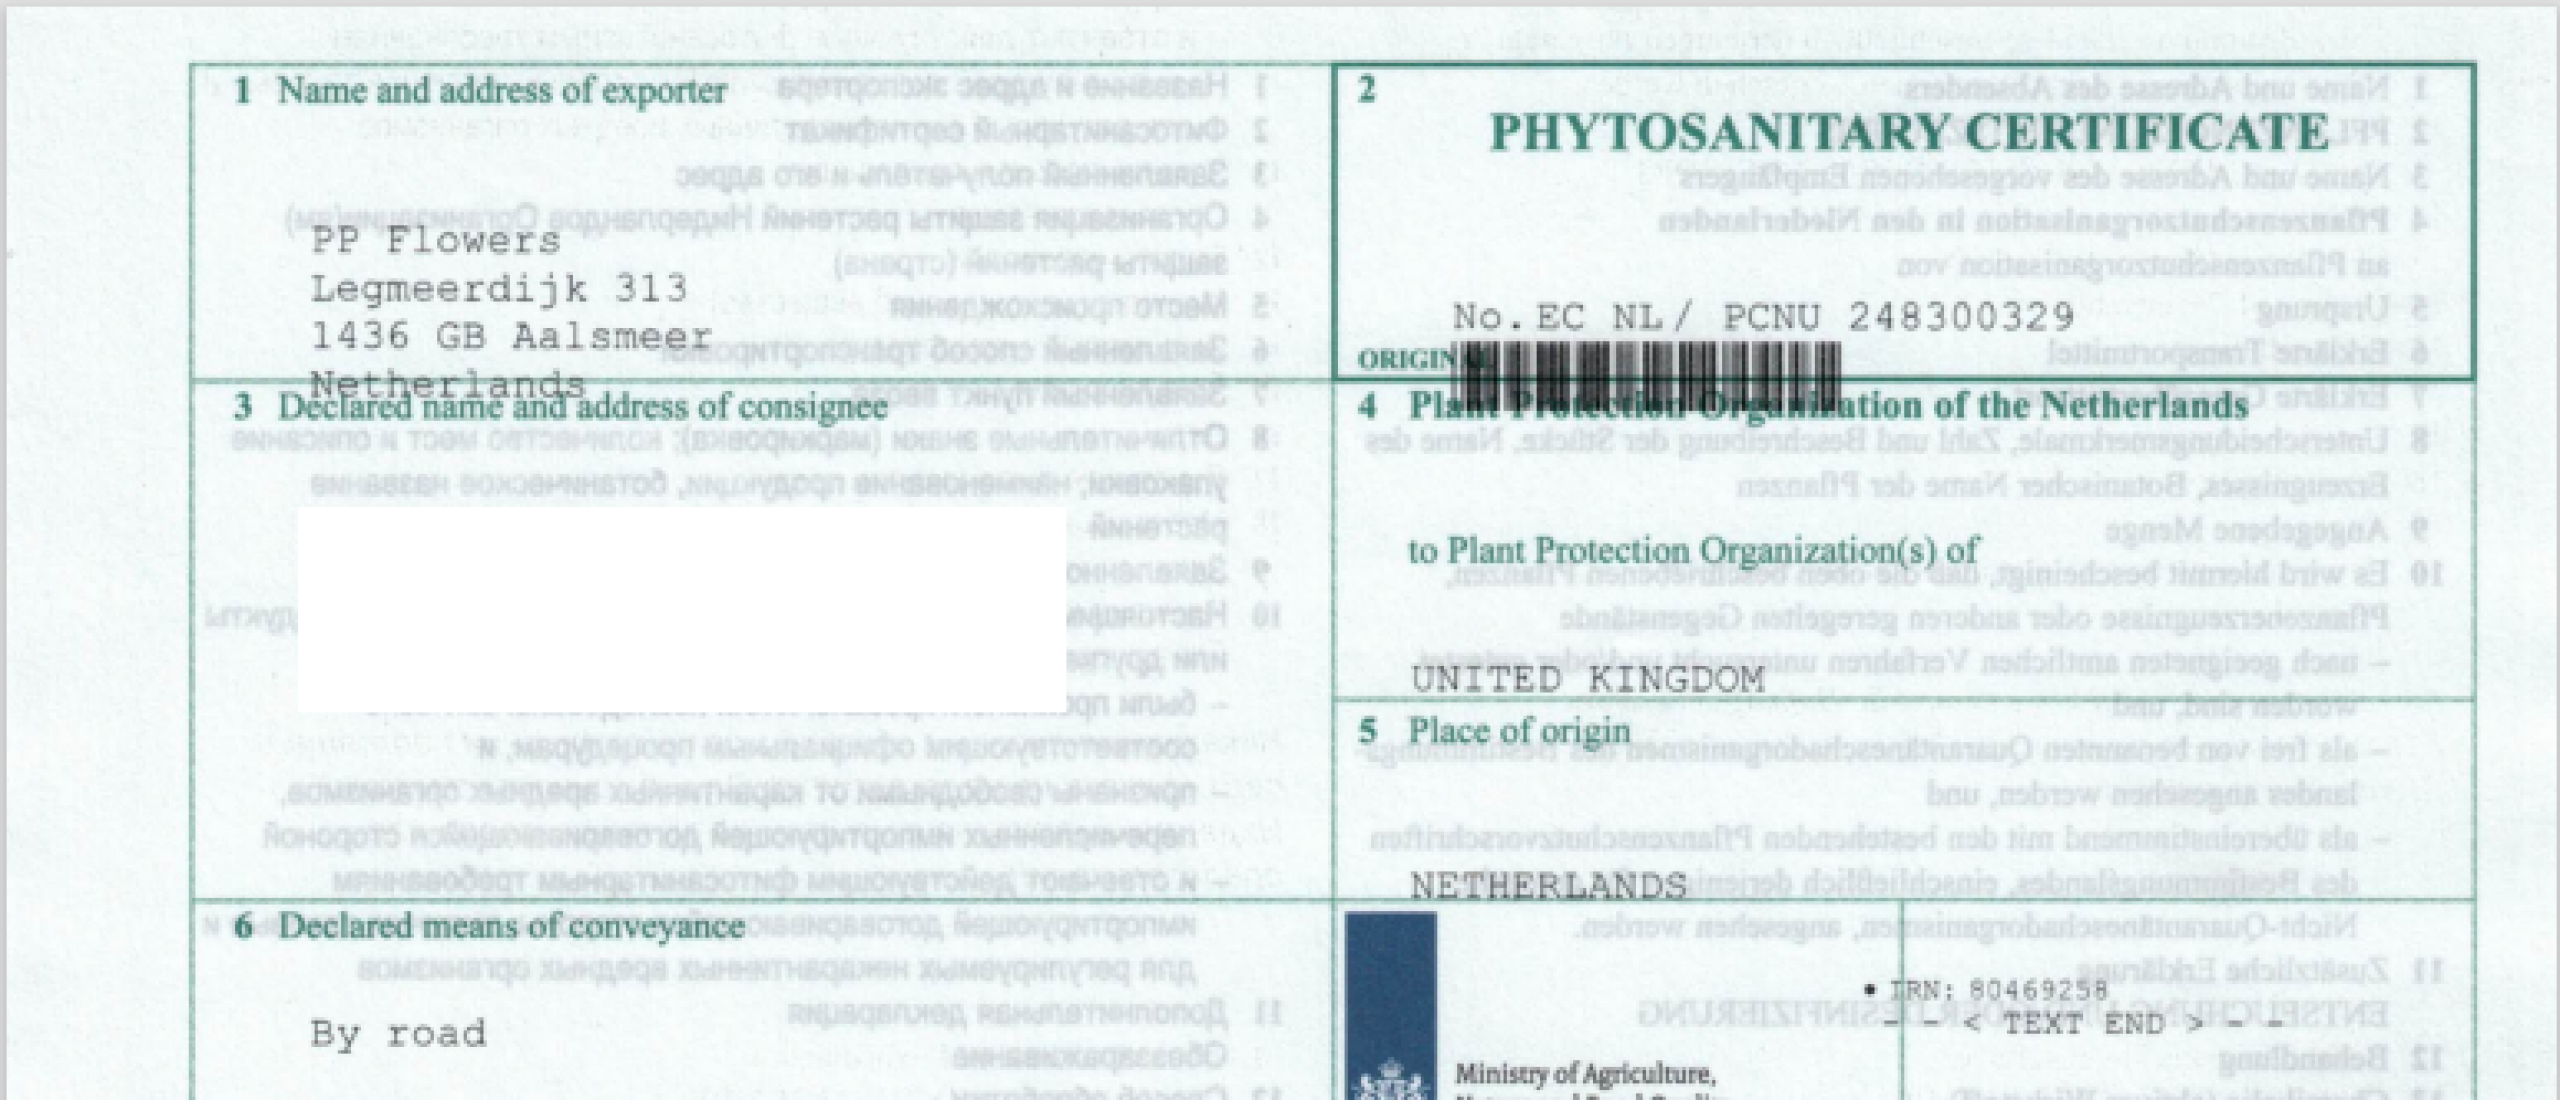 How to make a Phytosanitary certificate for plants